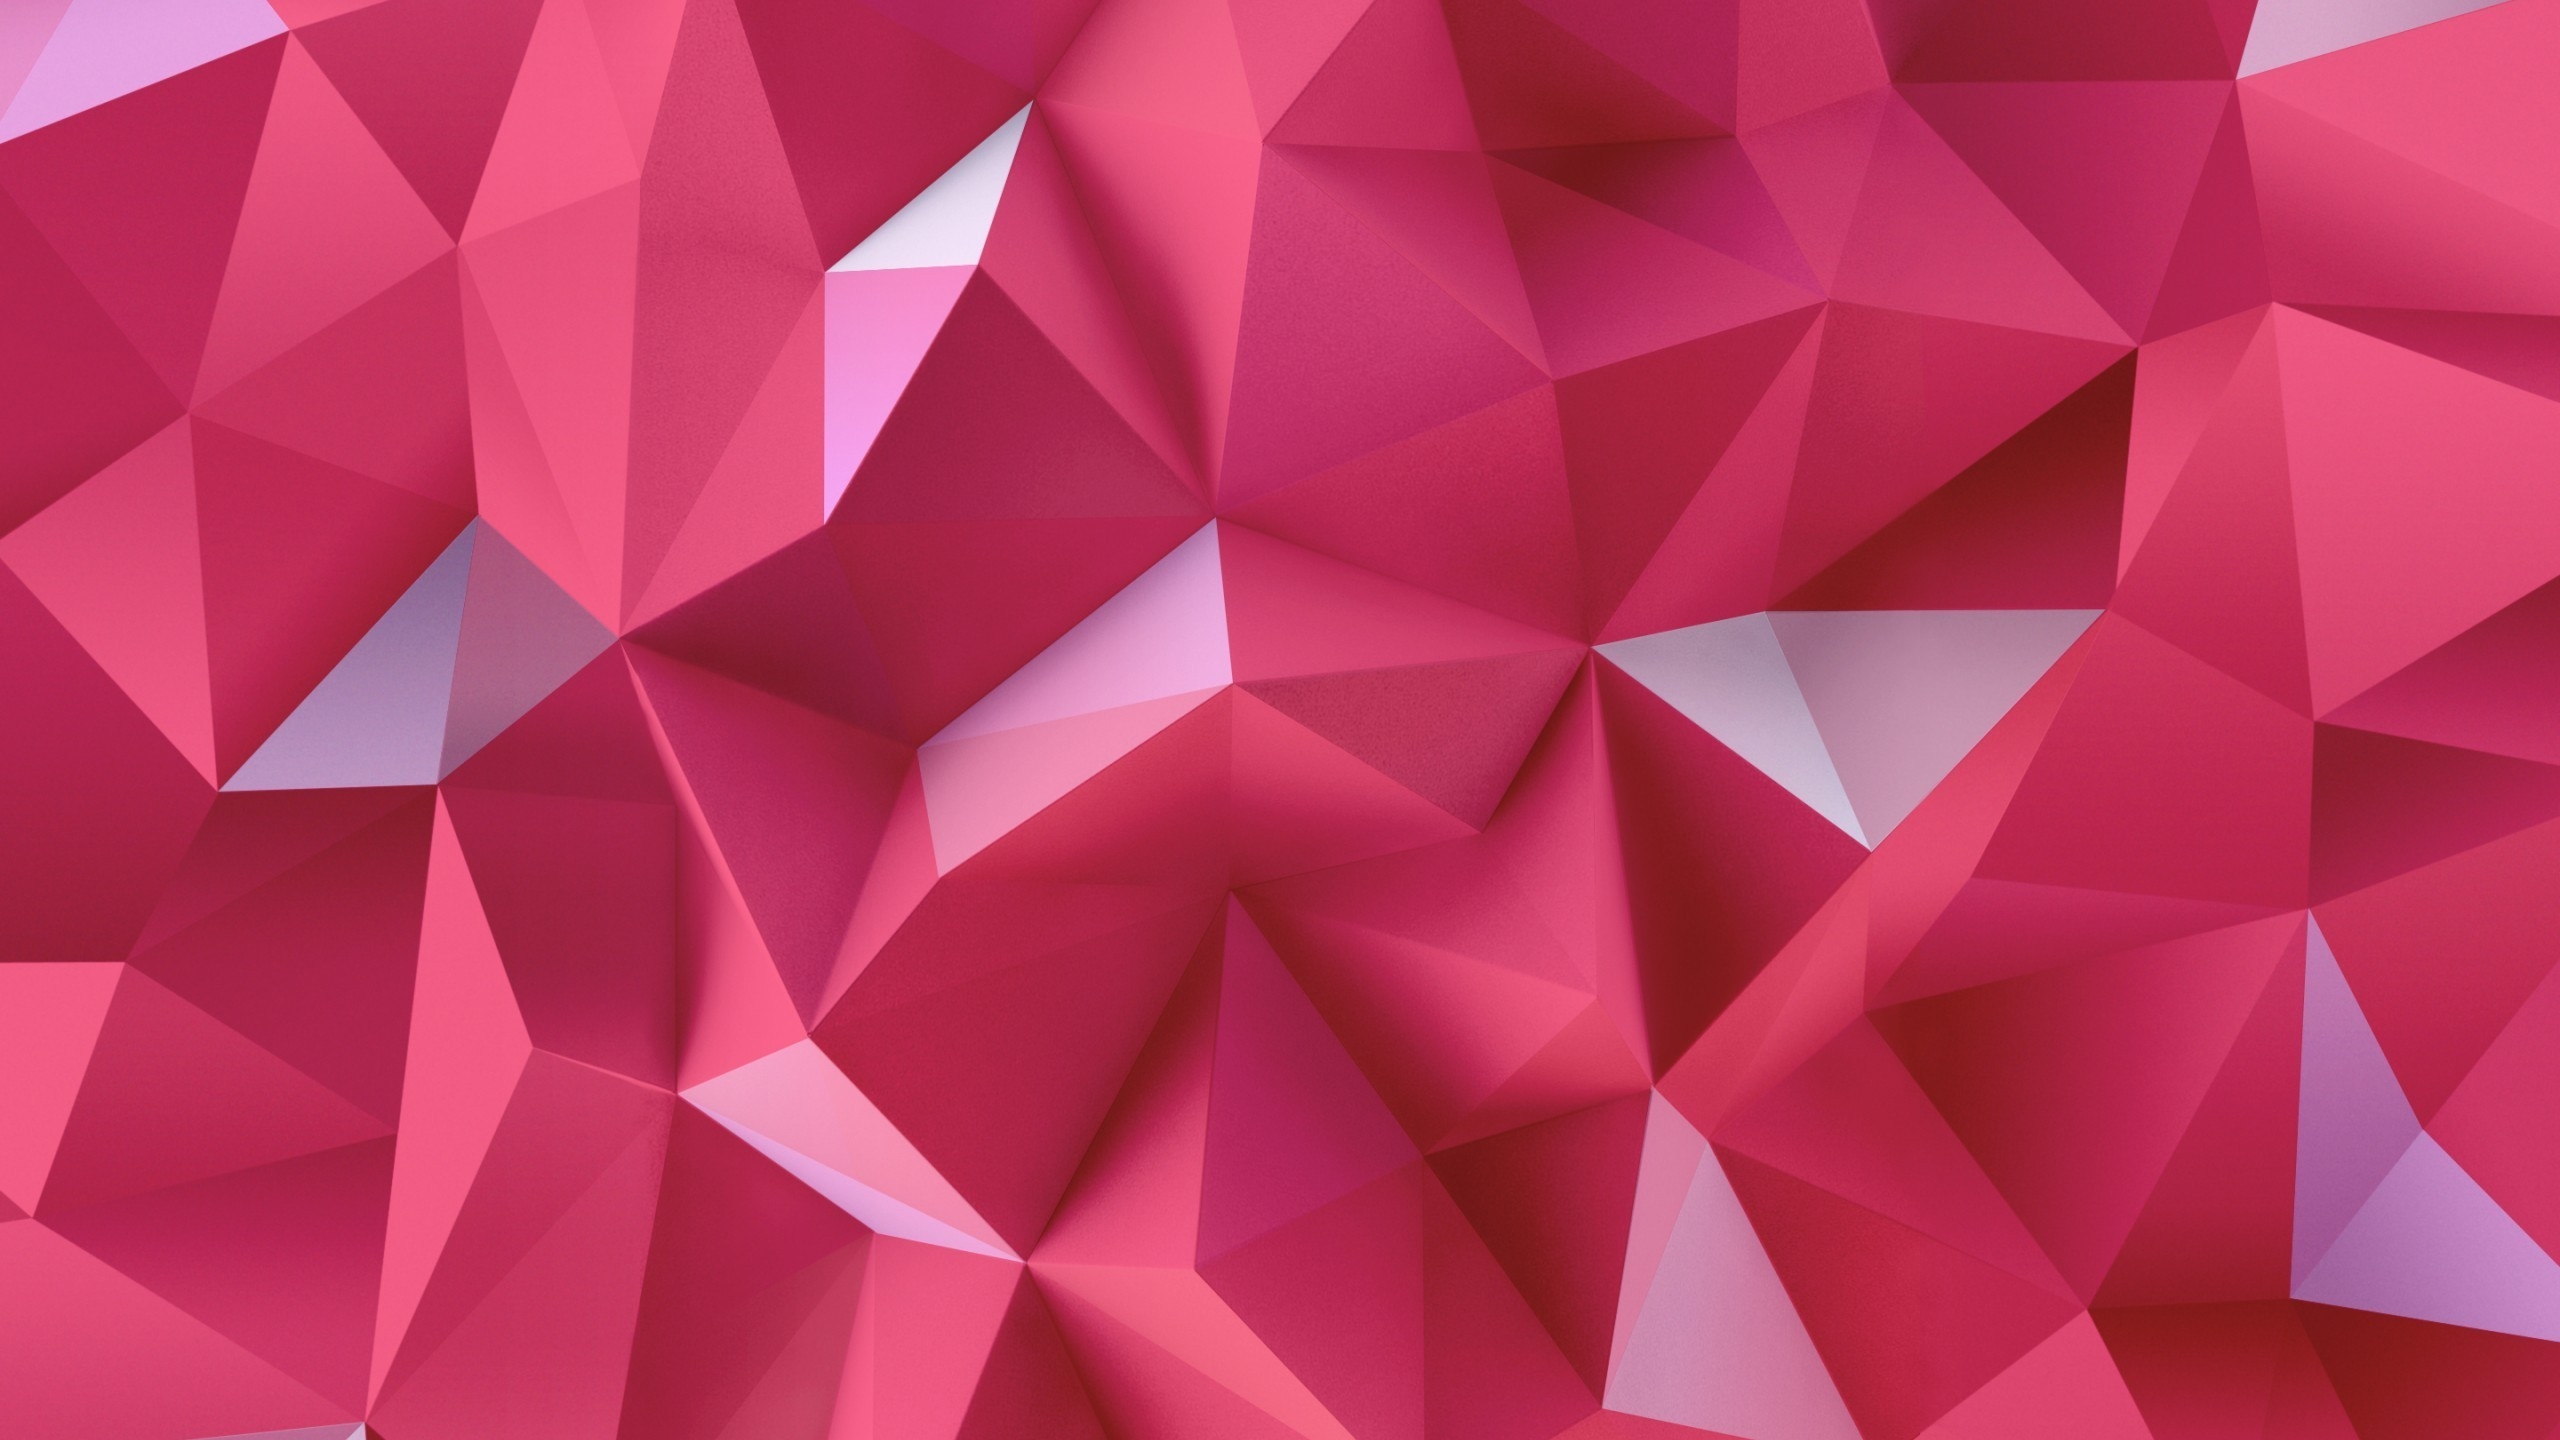 Pink Triangles for 2560x1440 HDTV resolution